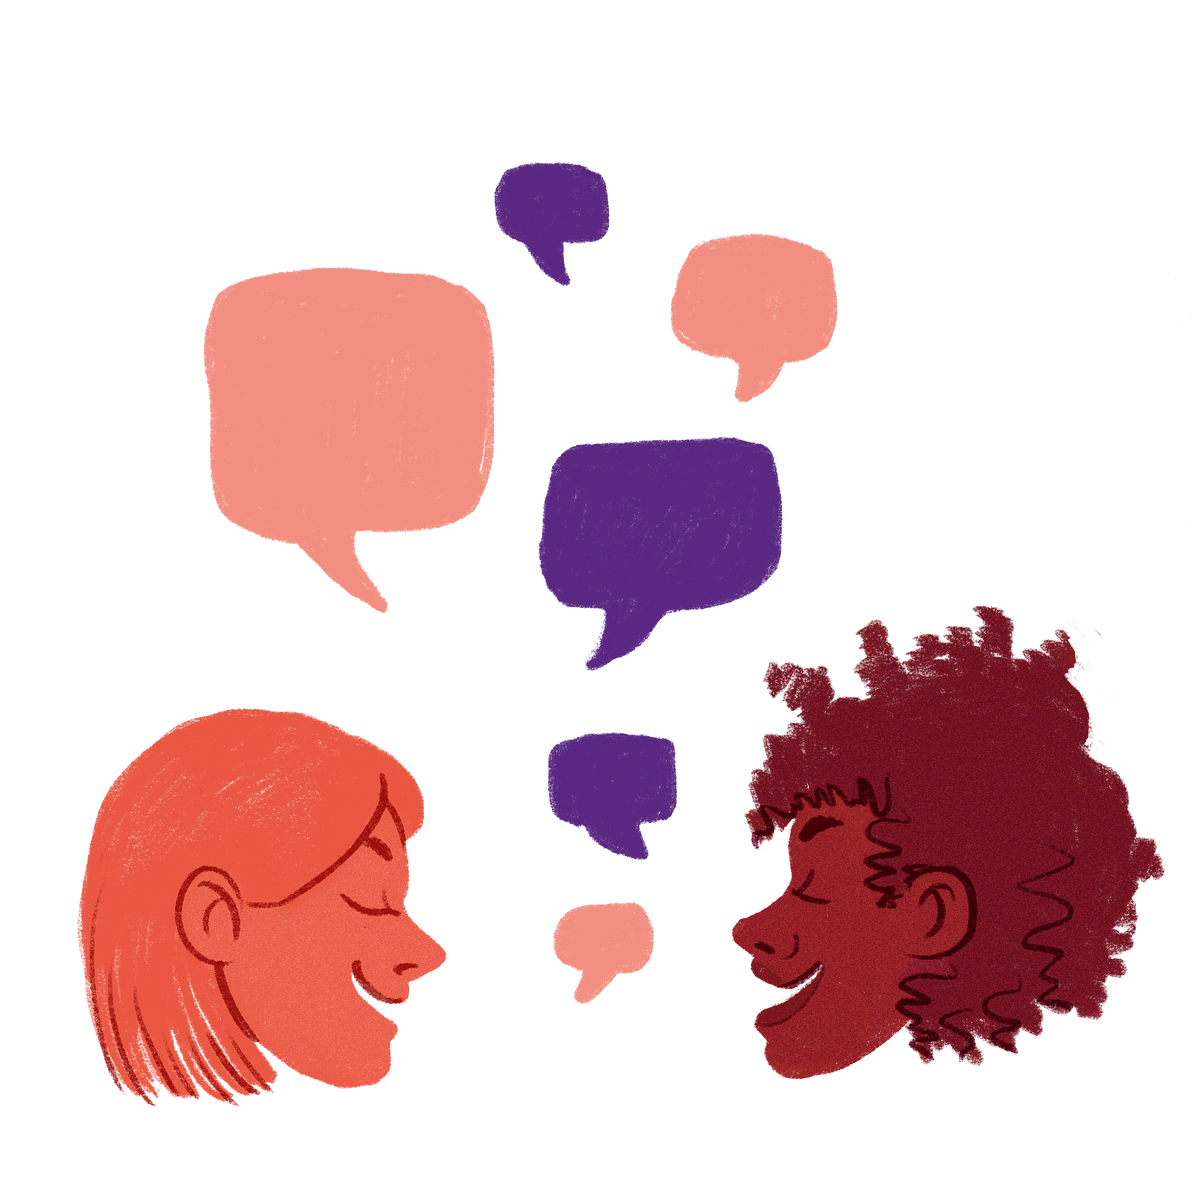 Illustration of two women facing each other, talking and several speech bubbles between them